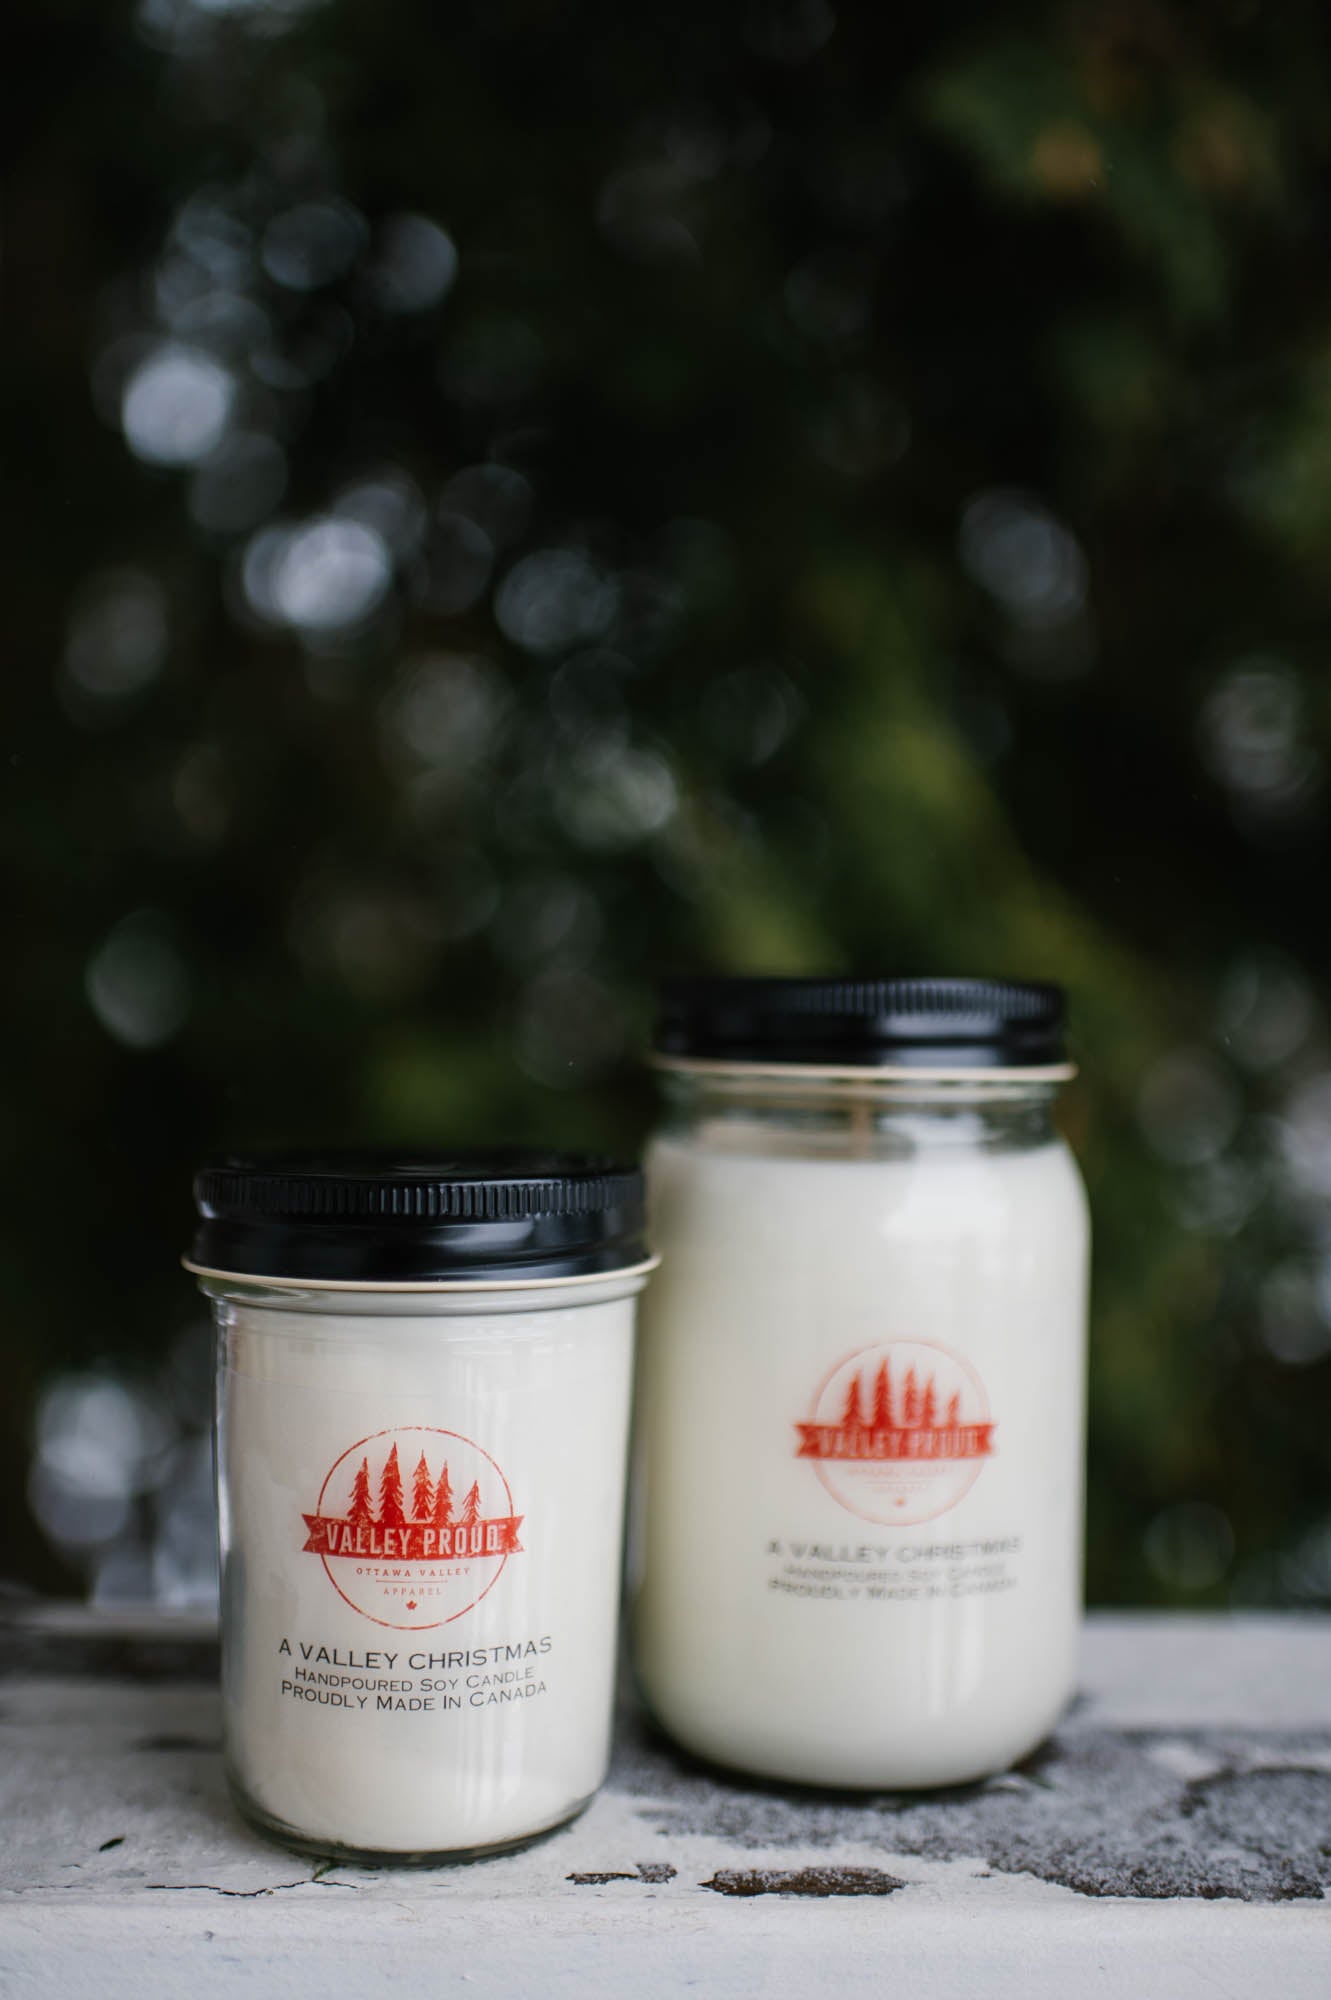 Valley Proud Soy Candle - A Valley Christmas